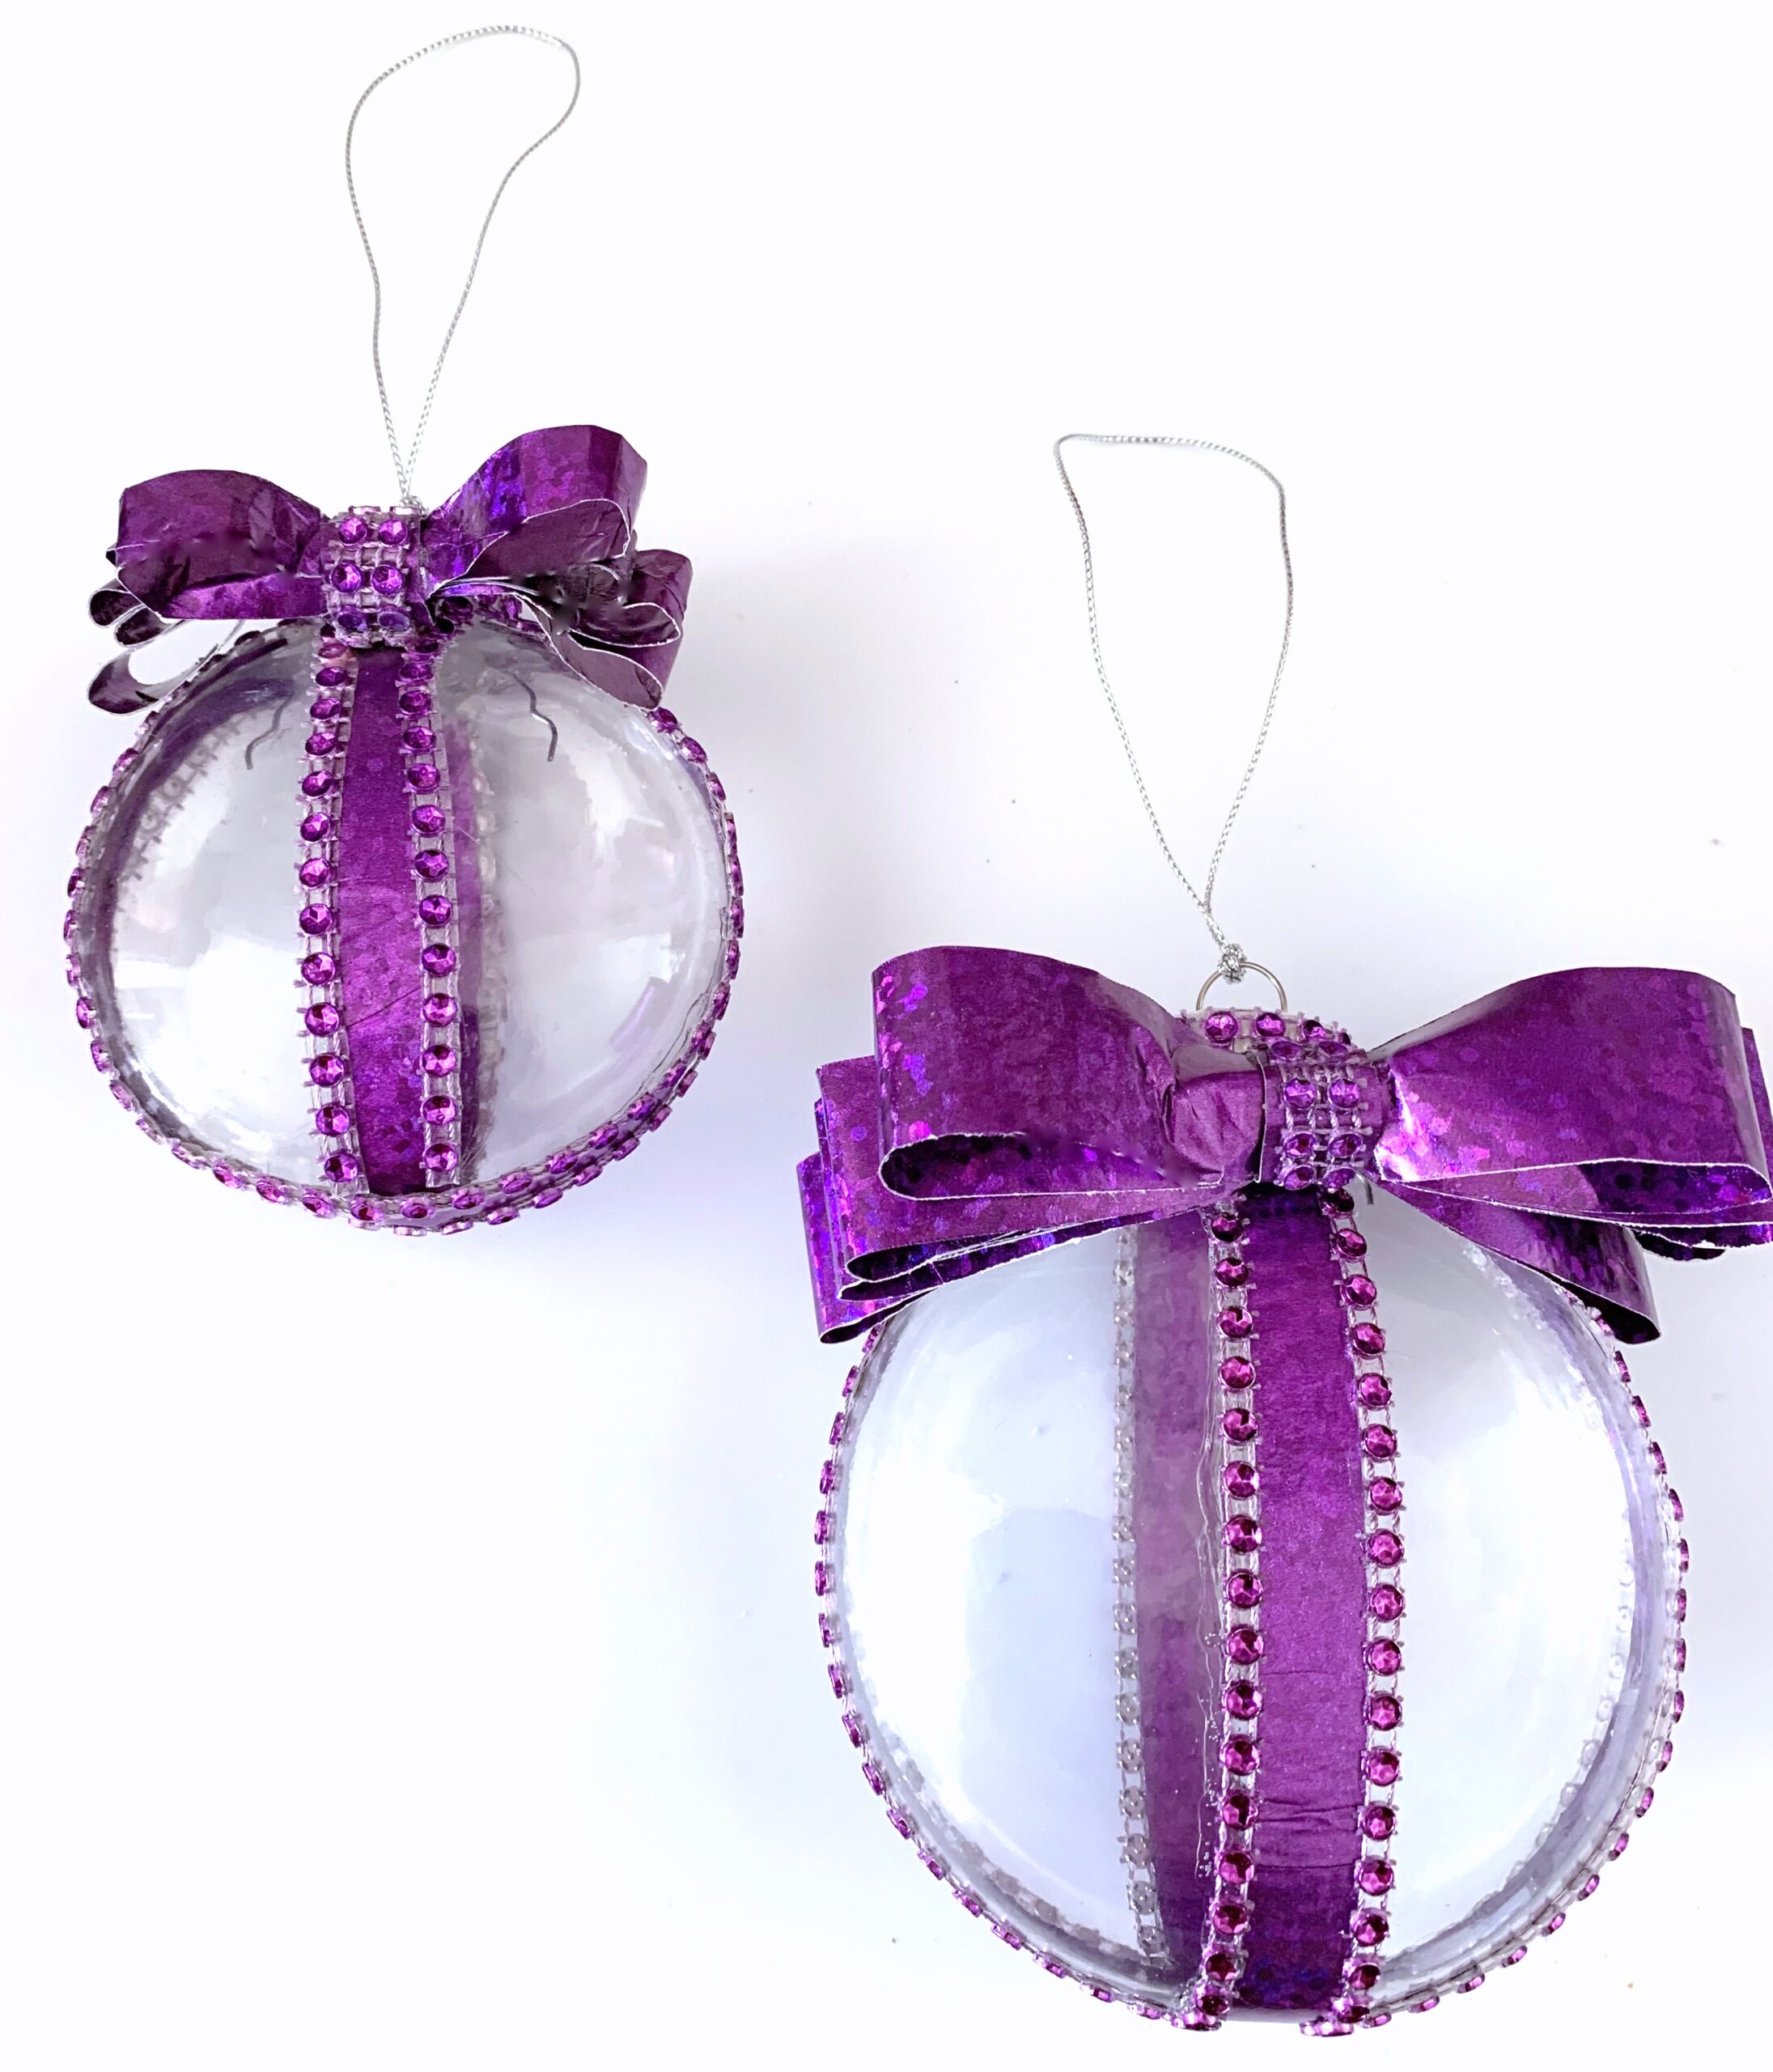 Try this revolutionary way to make a special wrapping paper ribbon ornament  : Bowdabra